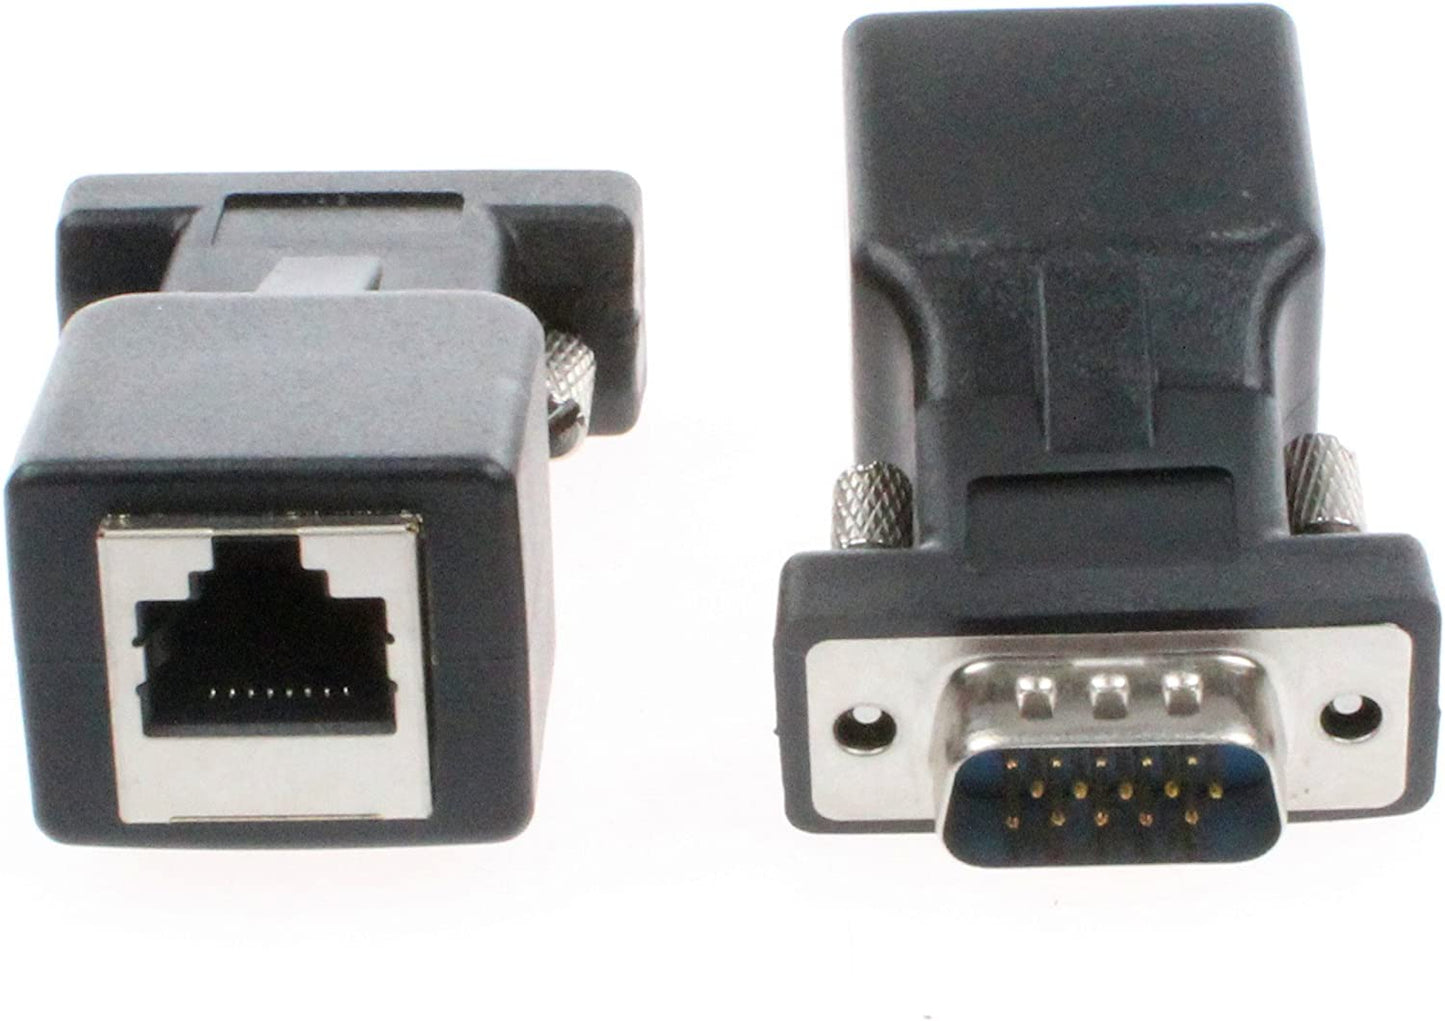 VGA to RJ45 Adapter VGA Extender Cat5 20 Meters Cat6 25 Meters VGA 15 Pin to RJ45 Male Female Network Cable Connector Support 720P 1080I 1080P Analog HD Transmission